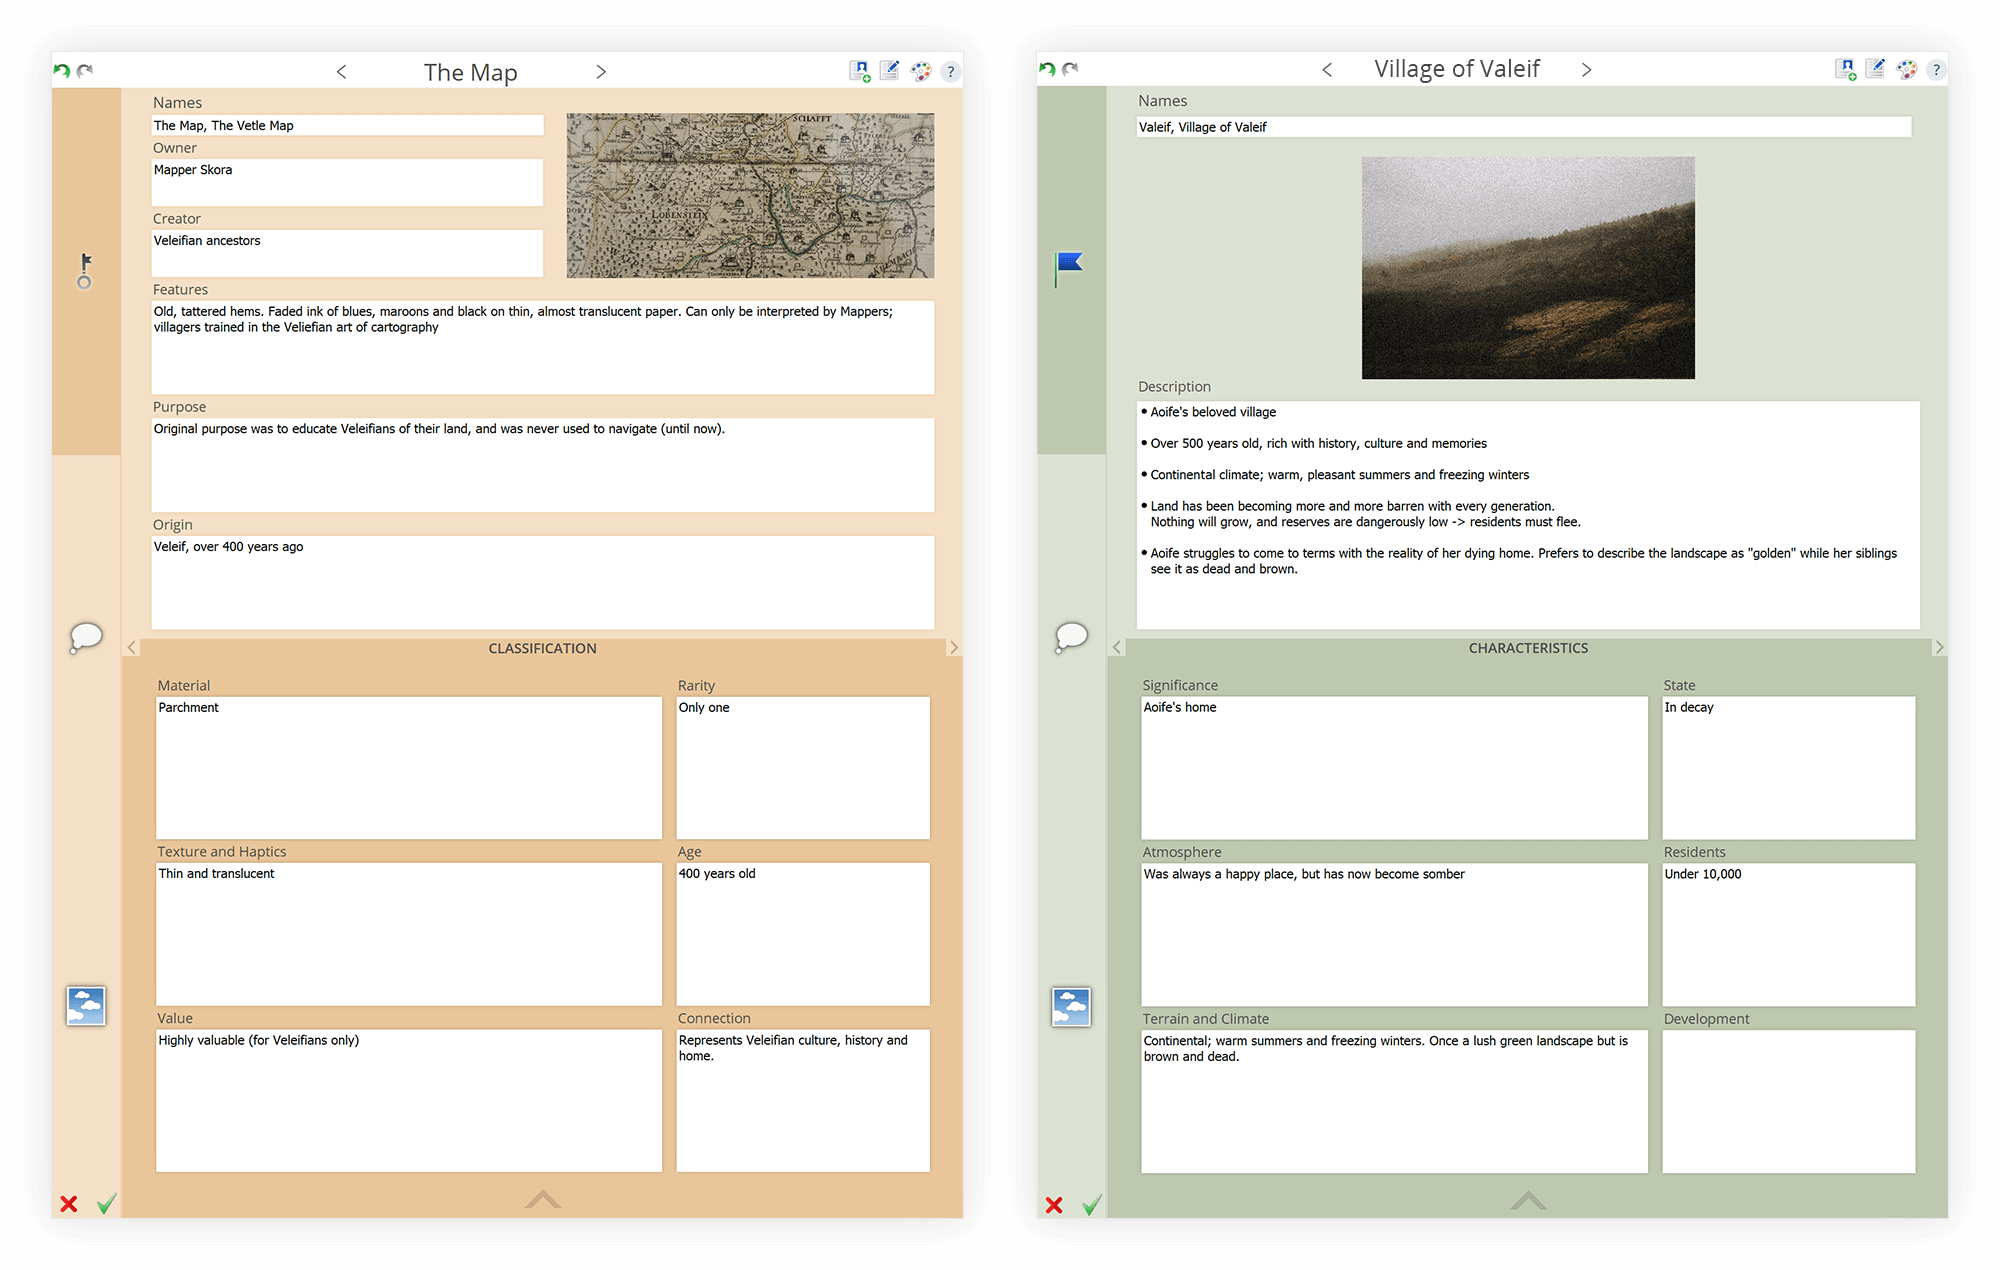 Location and Item sheets in the Story Sheets